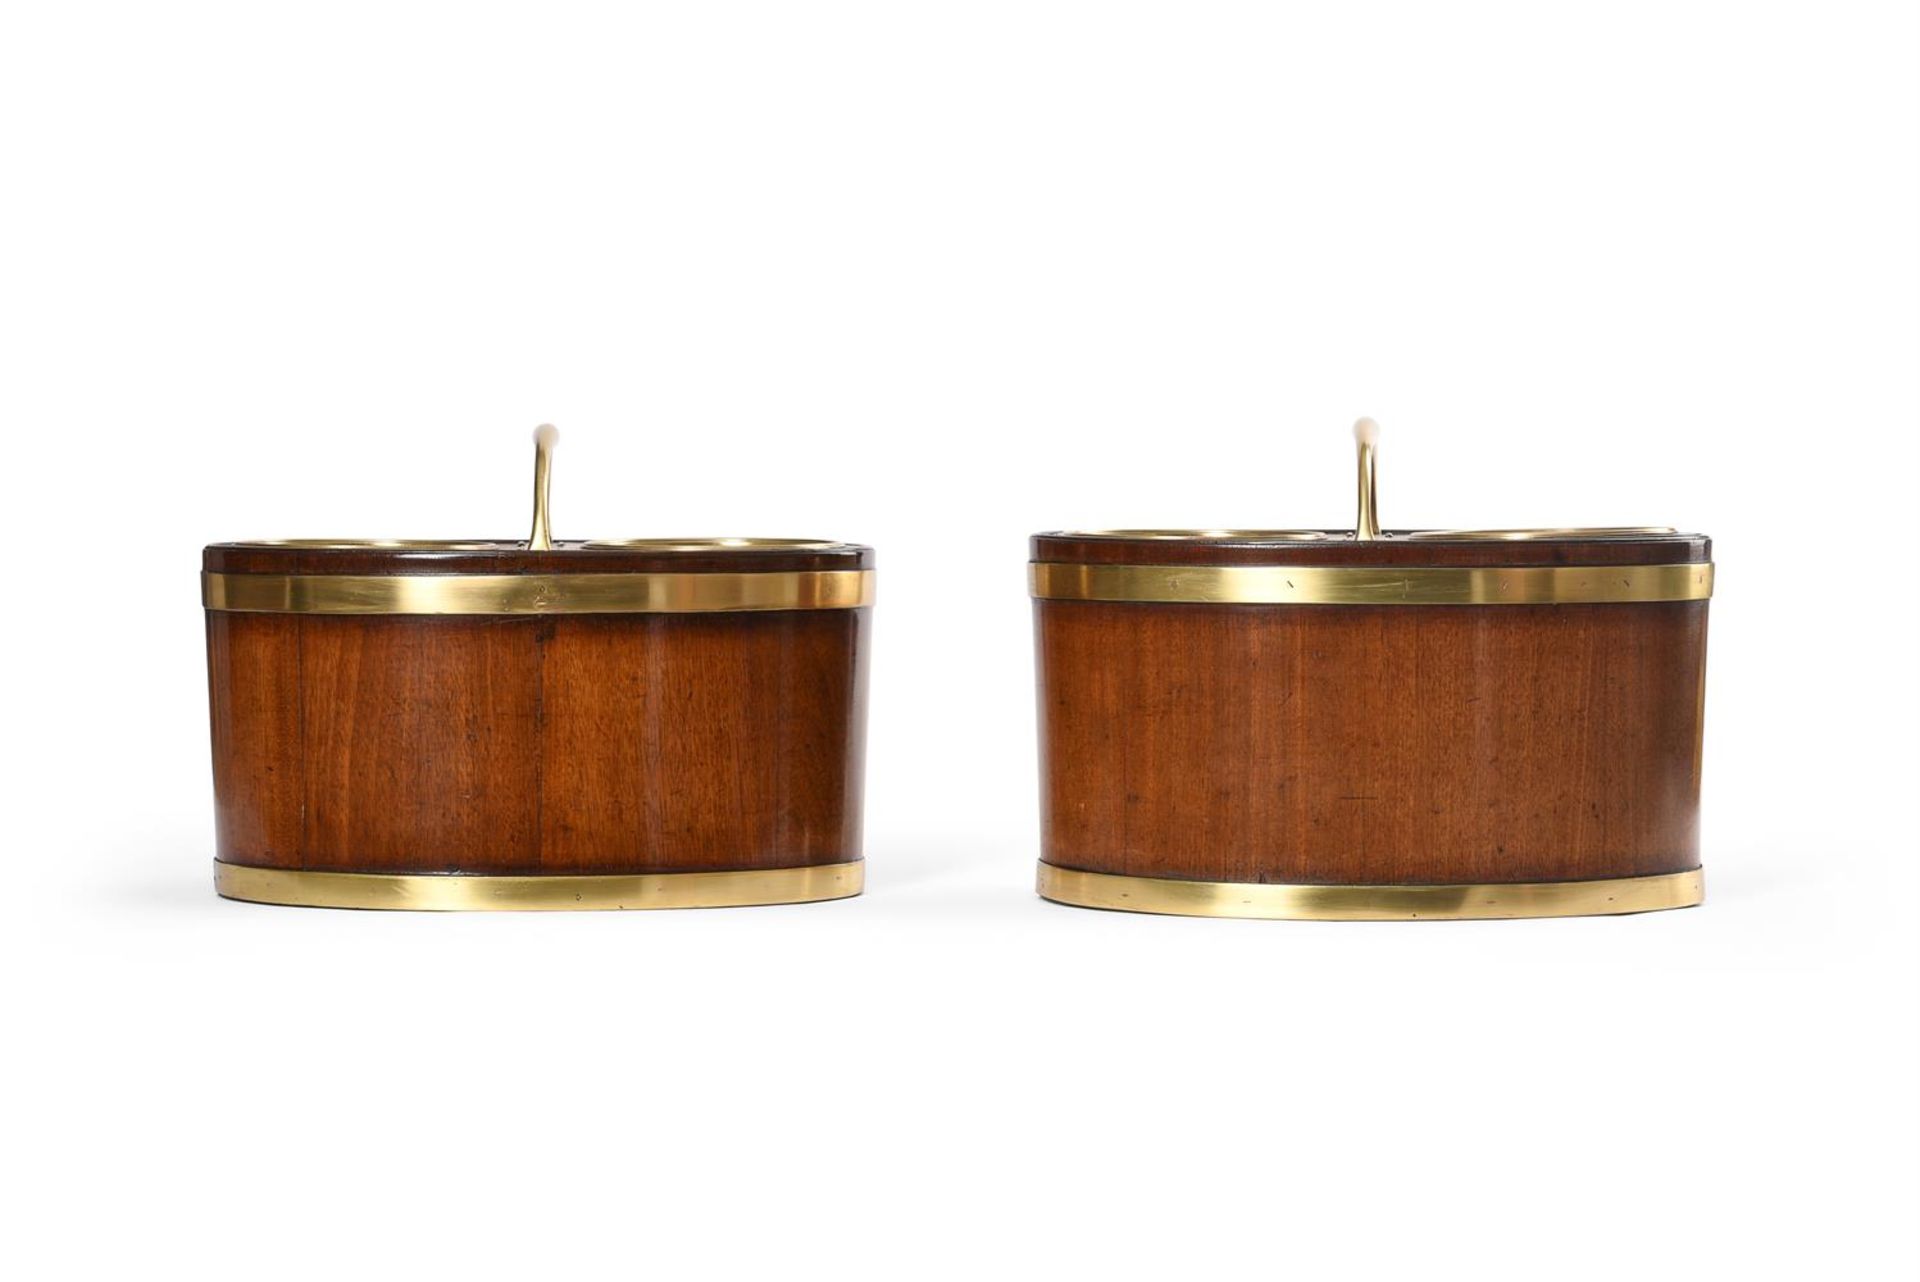 A RARE PAIR OF GEORGE III BRASS MOUNTED MAHOGANY TABLE TOP OVAL WINE COOLERS, CIRCA 1790 - Image 3 of 3